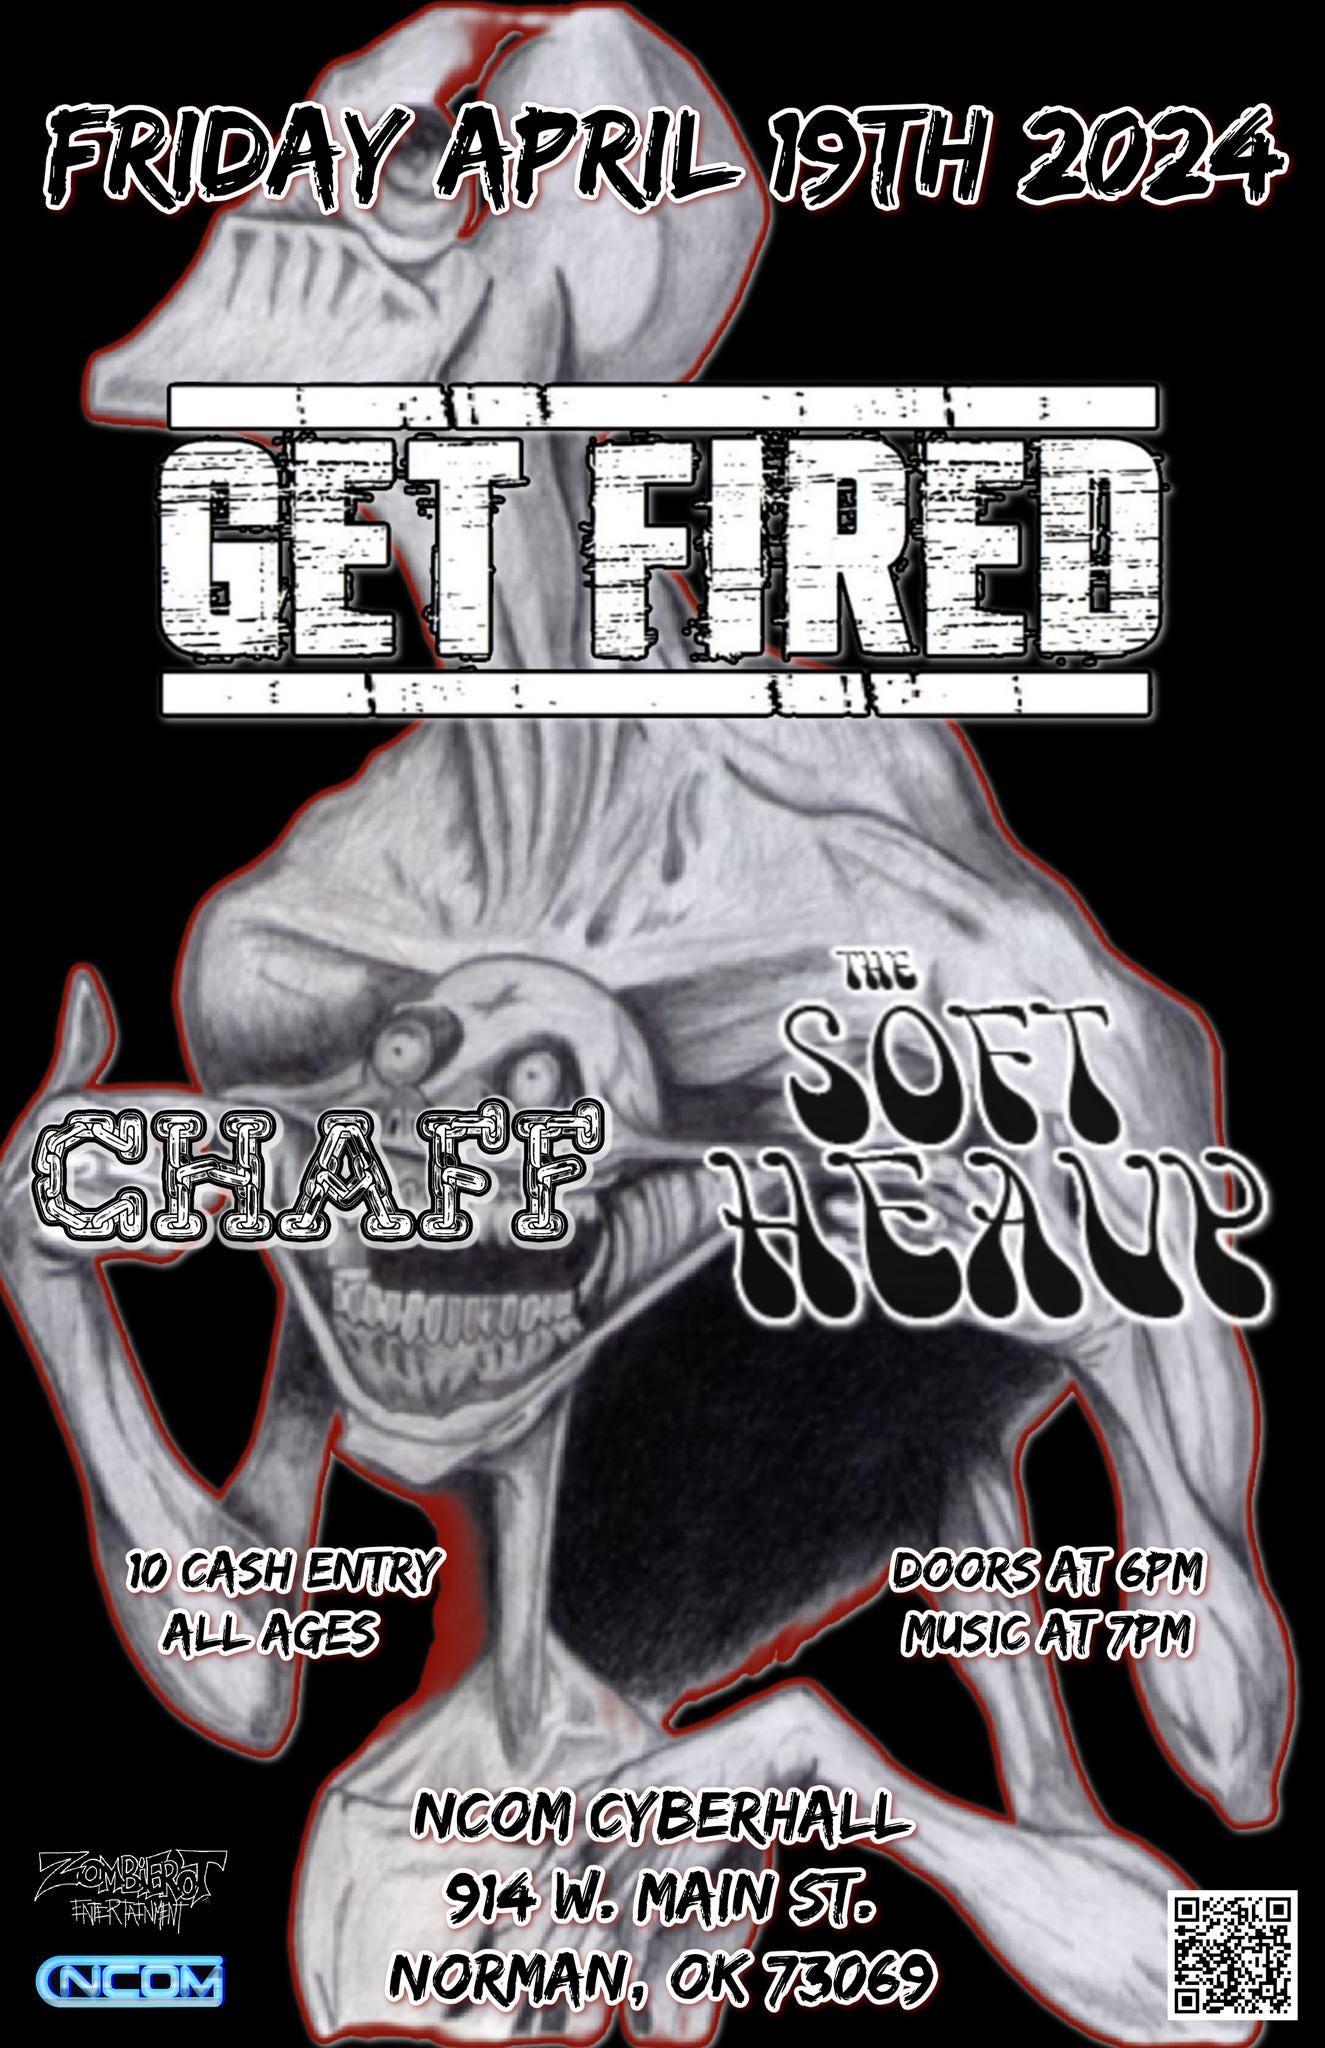 May be an image of ‎text that says '‎FRIDAY APRIL 19TH 2024 GLTFIRED FIRED CHAFF అత یUC THE SOFT ueav 10 CASH ENTRY ALLAGES AGES DOORS AT 6PM MUSIC AT 7PM NCOM NCOM CYBERHALL 914 W. MAIN ST. NORMAN, OK 73069‎'‎